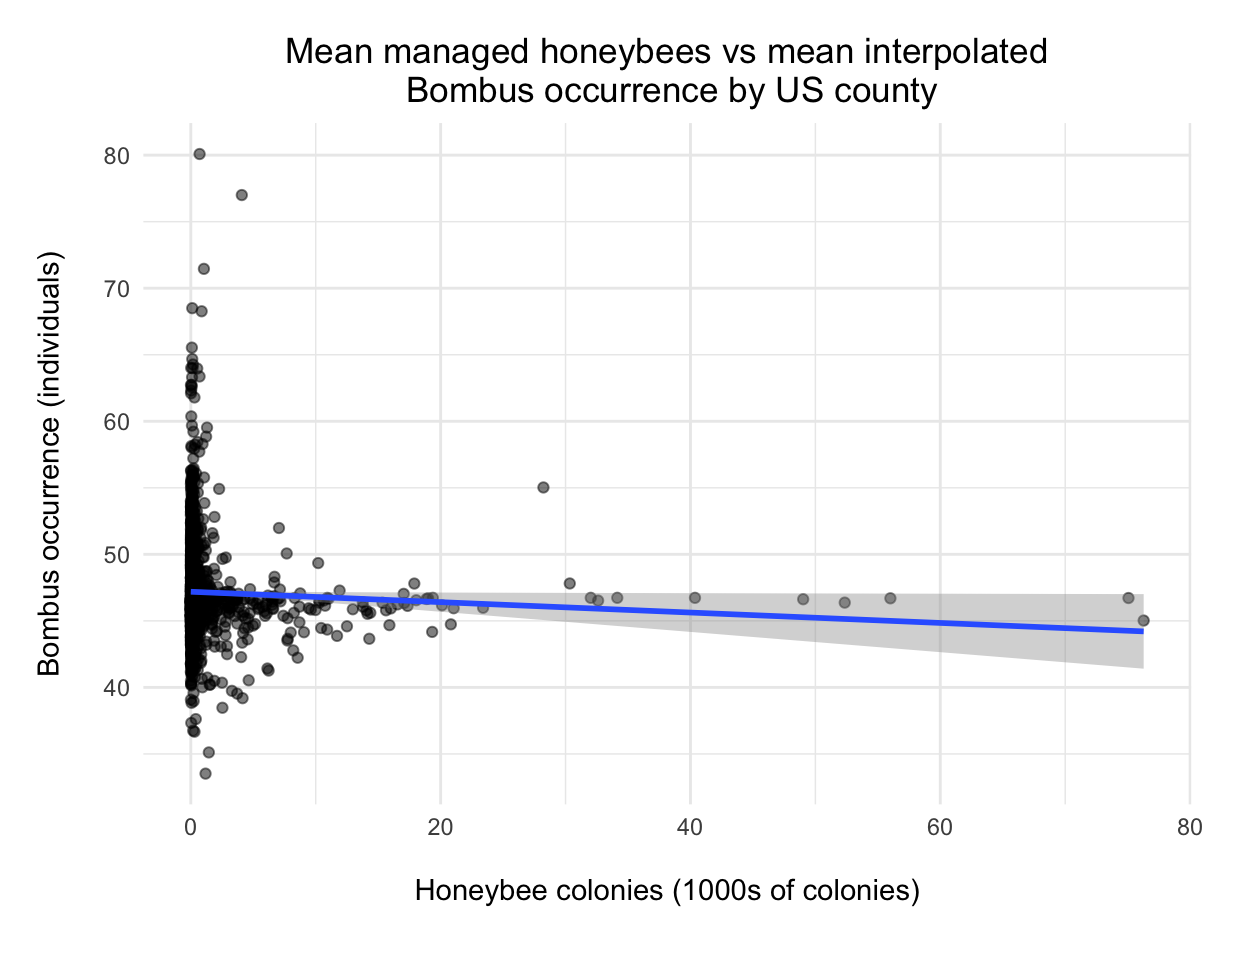 This scatterplot compares the mean number of managed honeybee hives per US county from agriculture census years 2002, 2007, and 2012 vs mean bumblebee occurrence per county derived from spatial interpolation of a national bee survey conducted between 2007 and 2010.